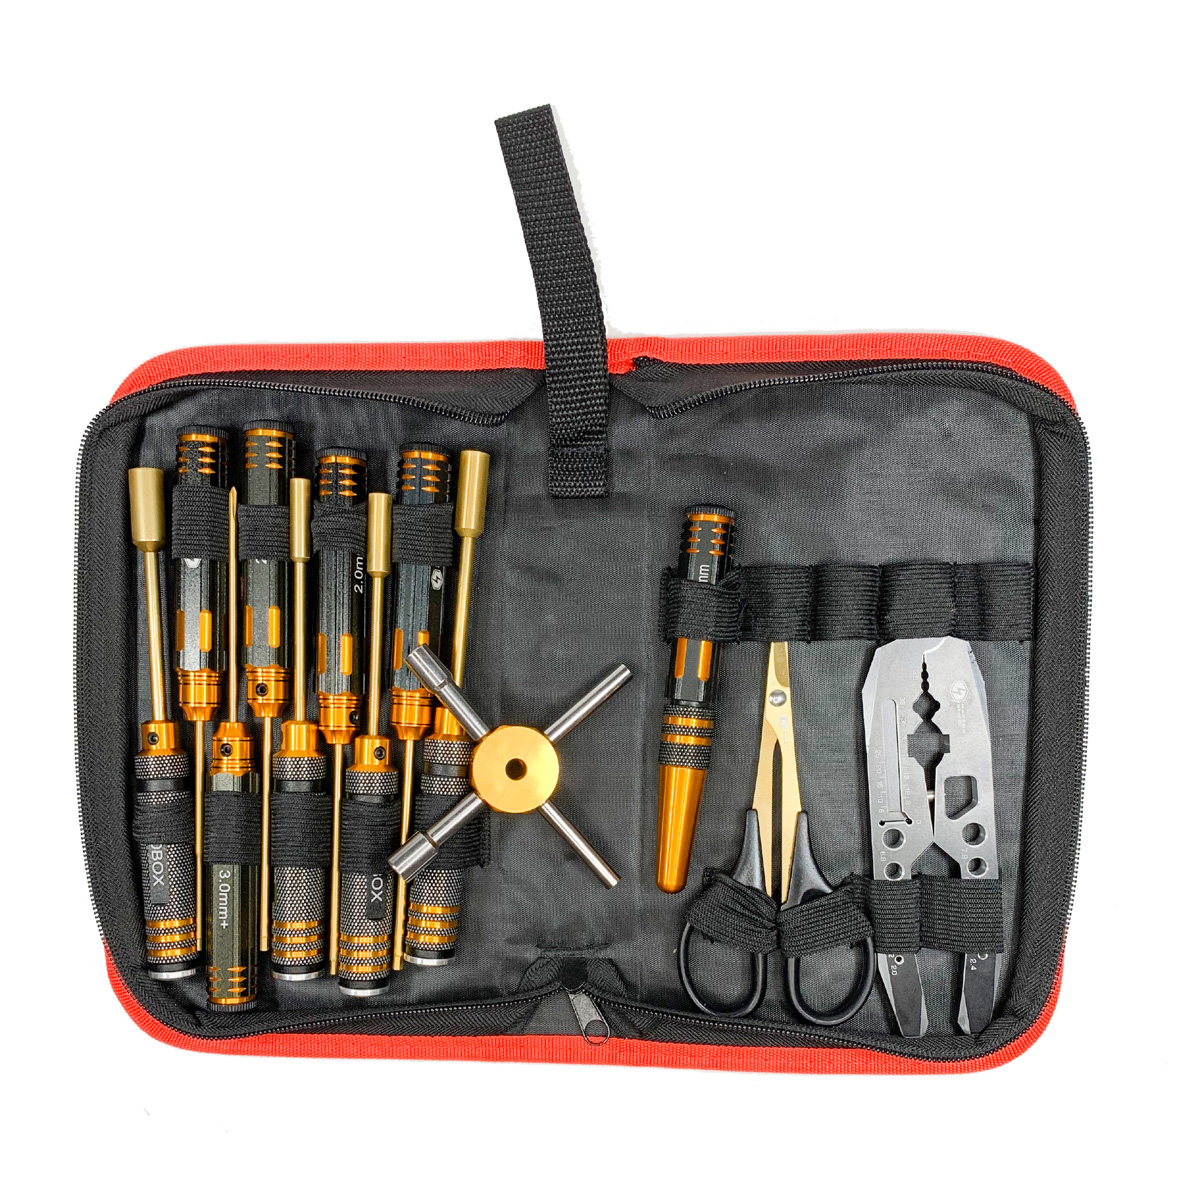 Picture of Racers Edge RCE7751 Metric Tool Set with Bag - 13 Piece